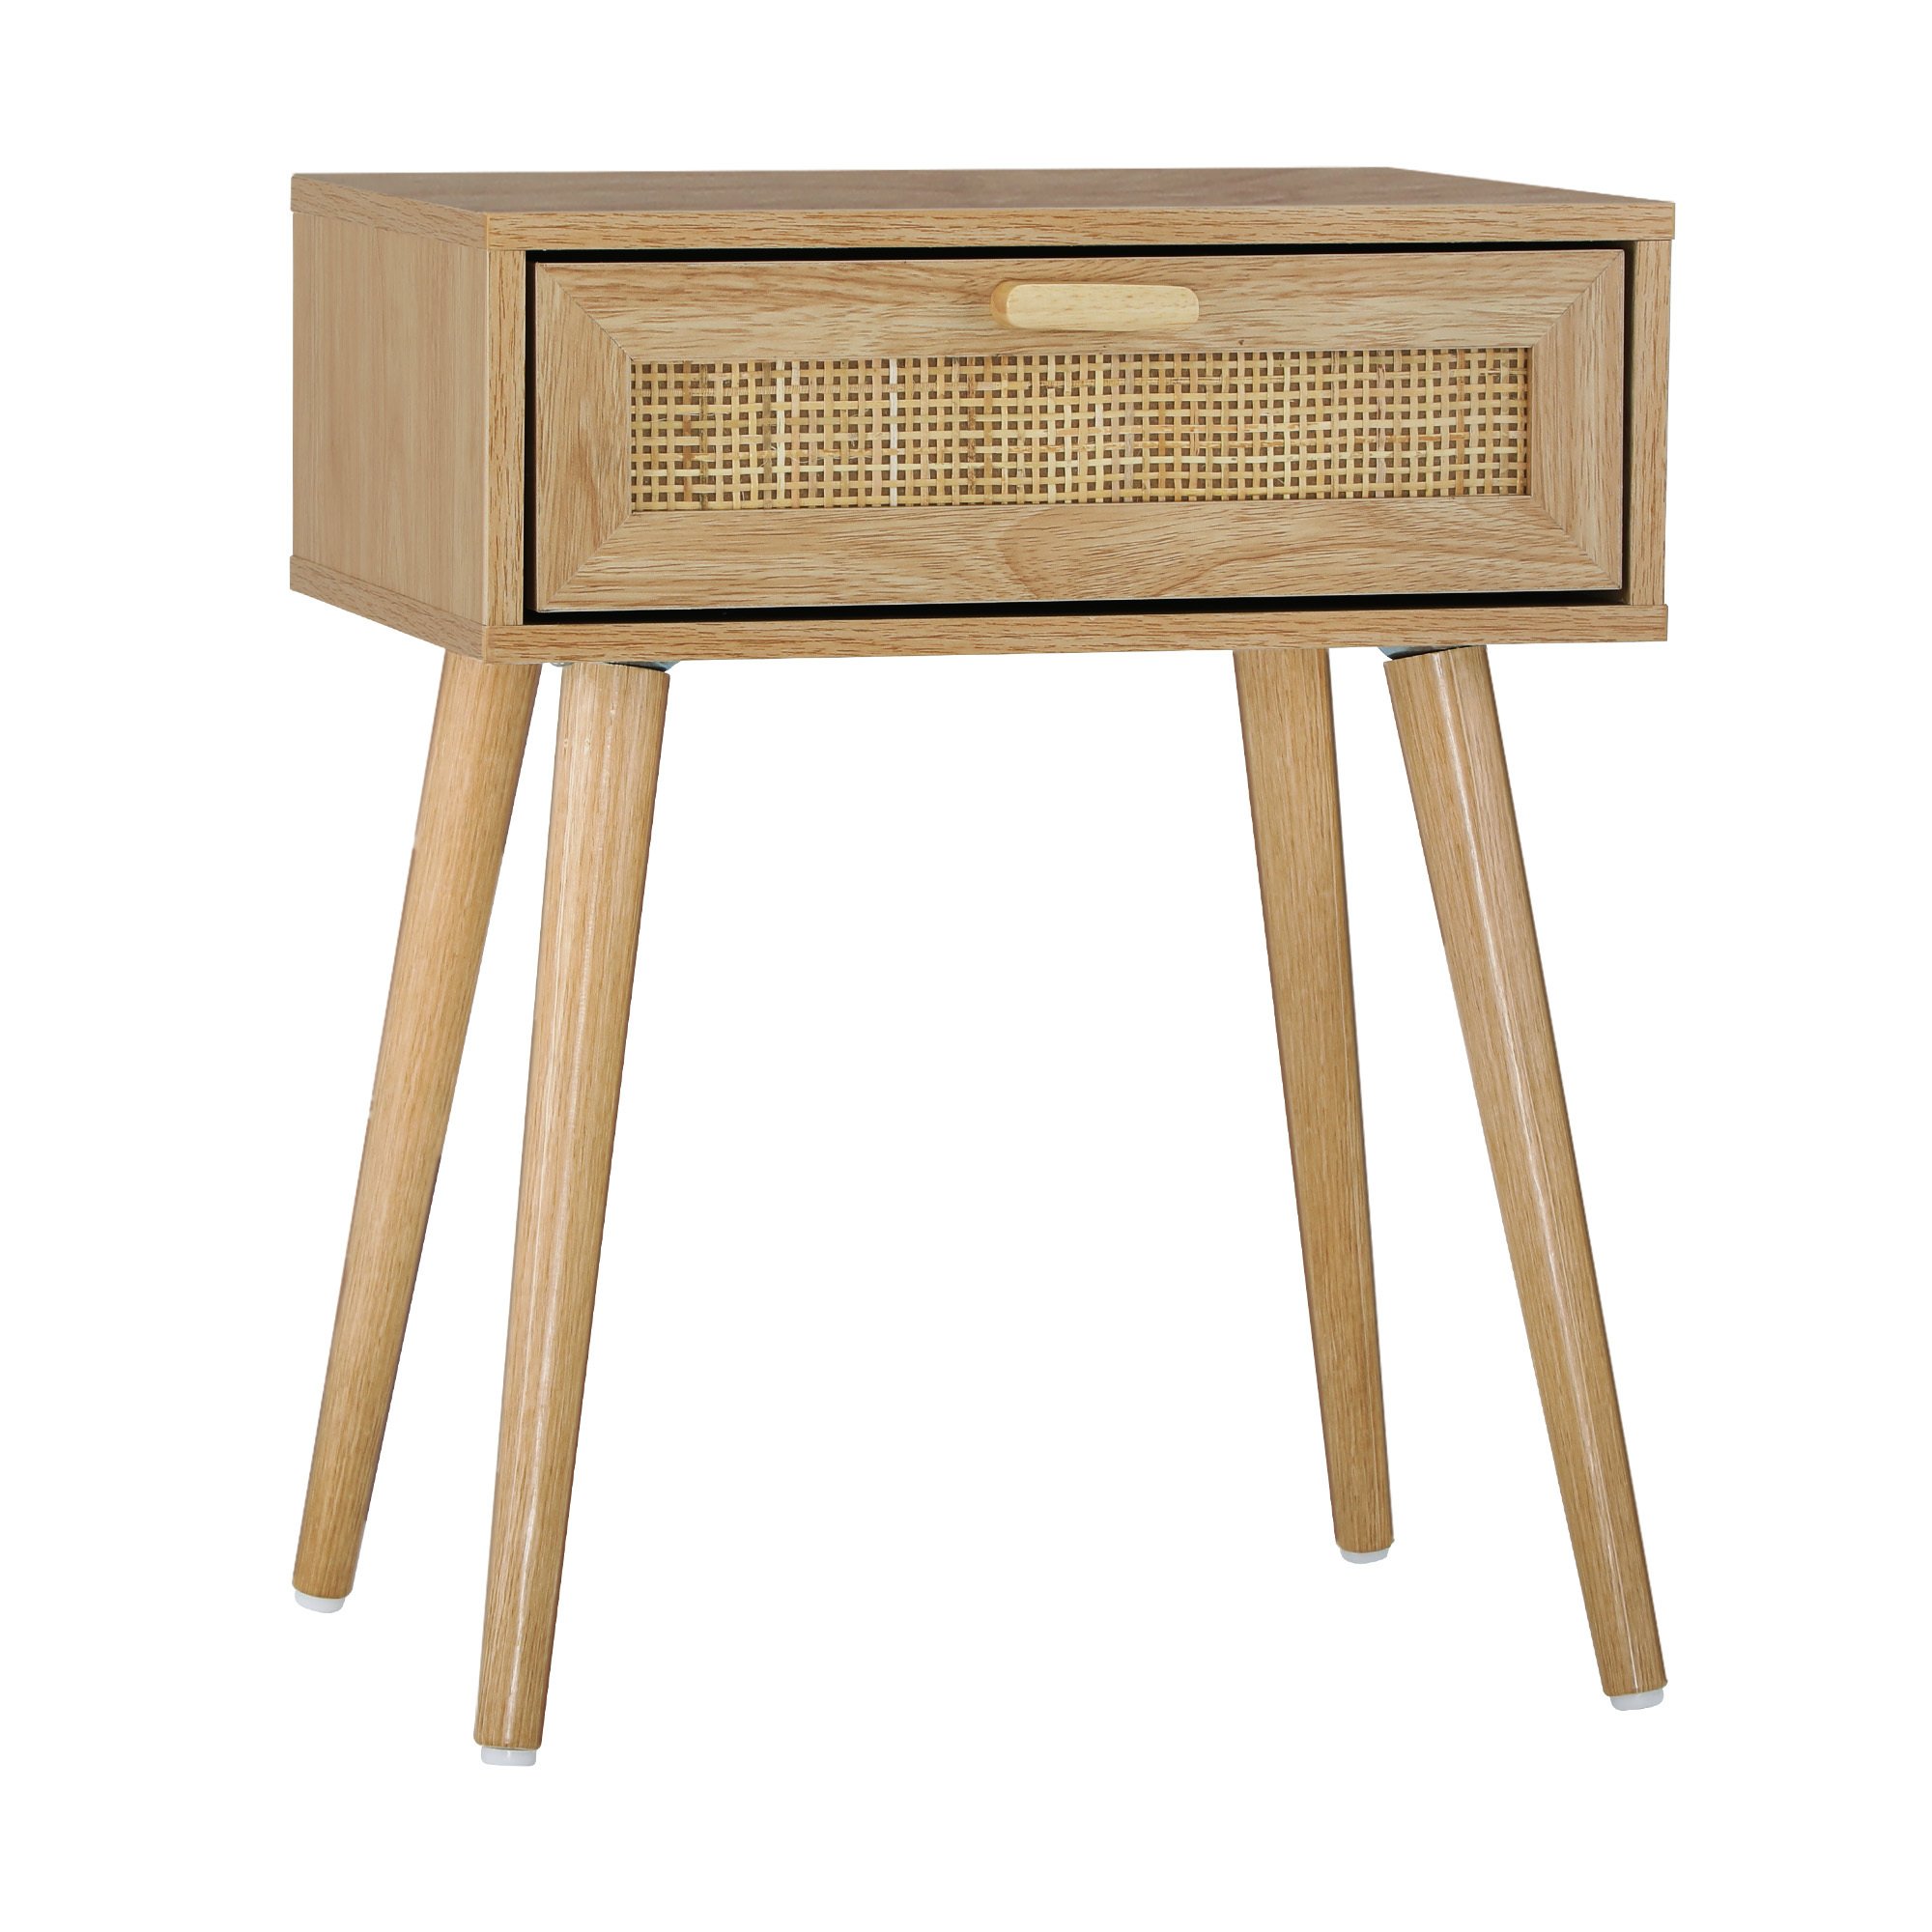 Wood and Rattan Bedside Table - Temple And Webster - $59.95